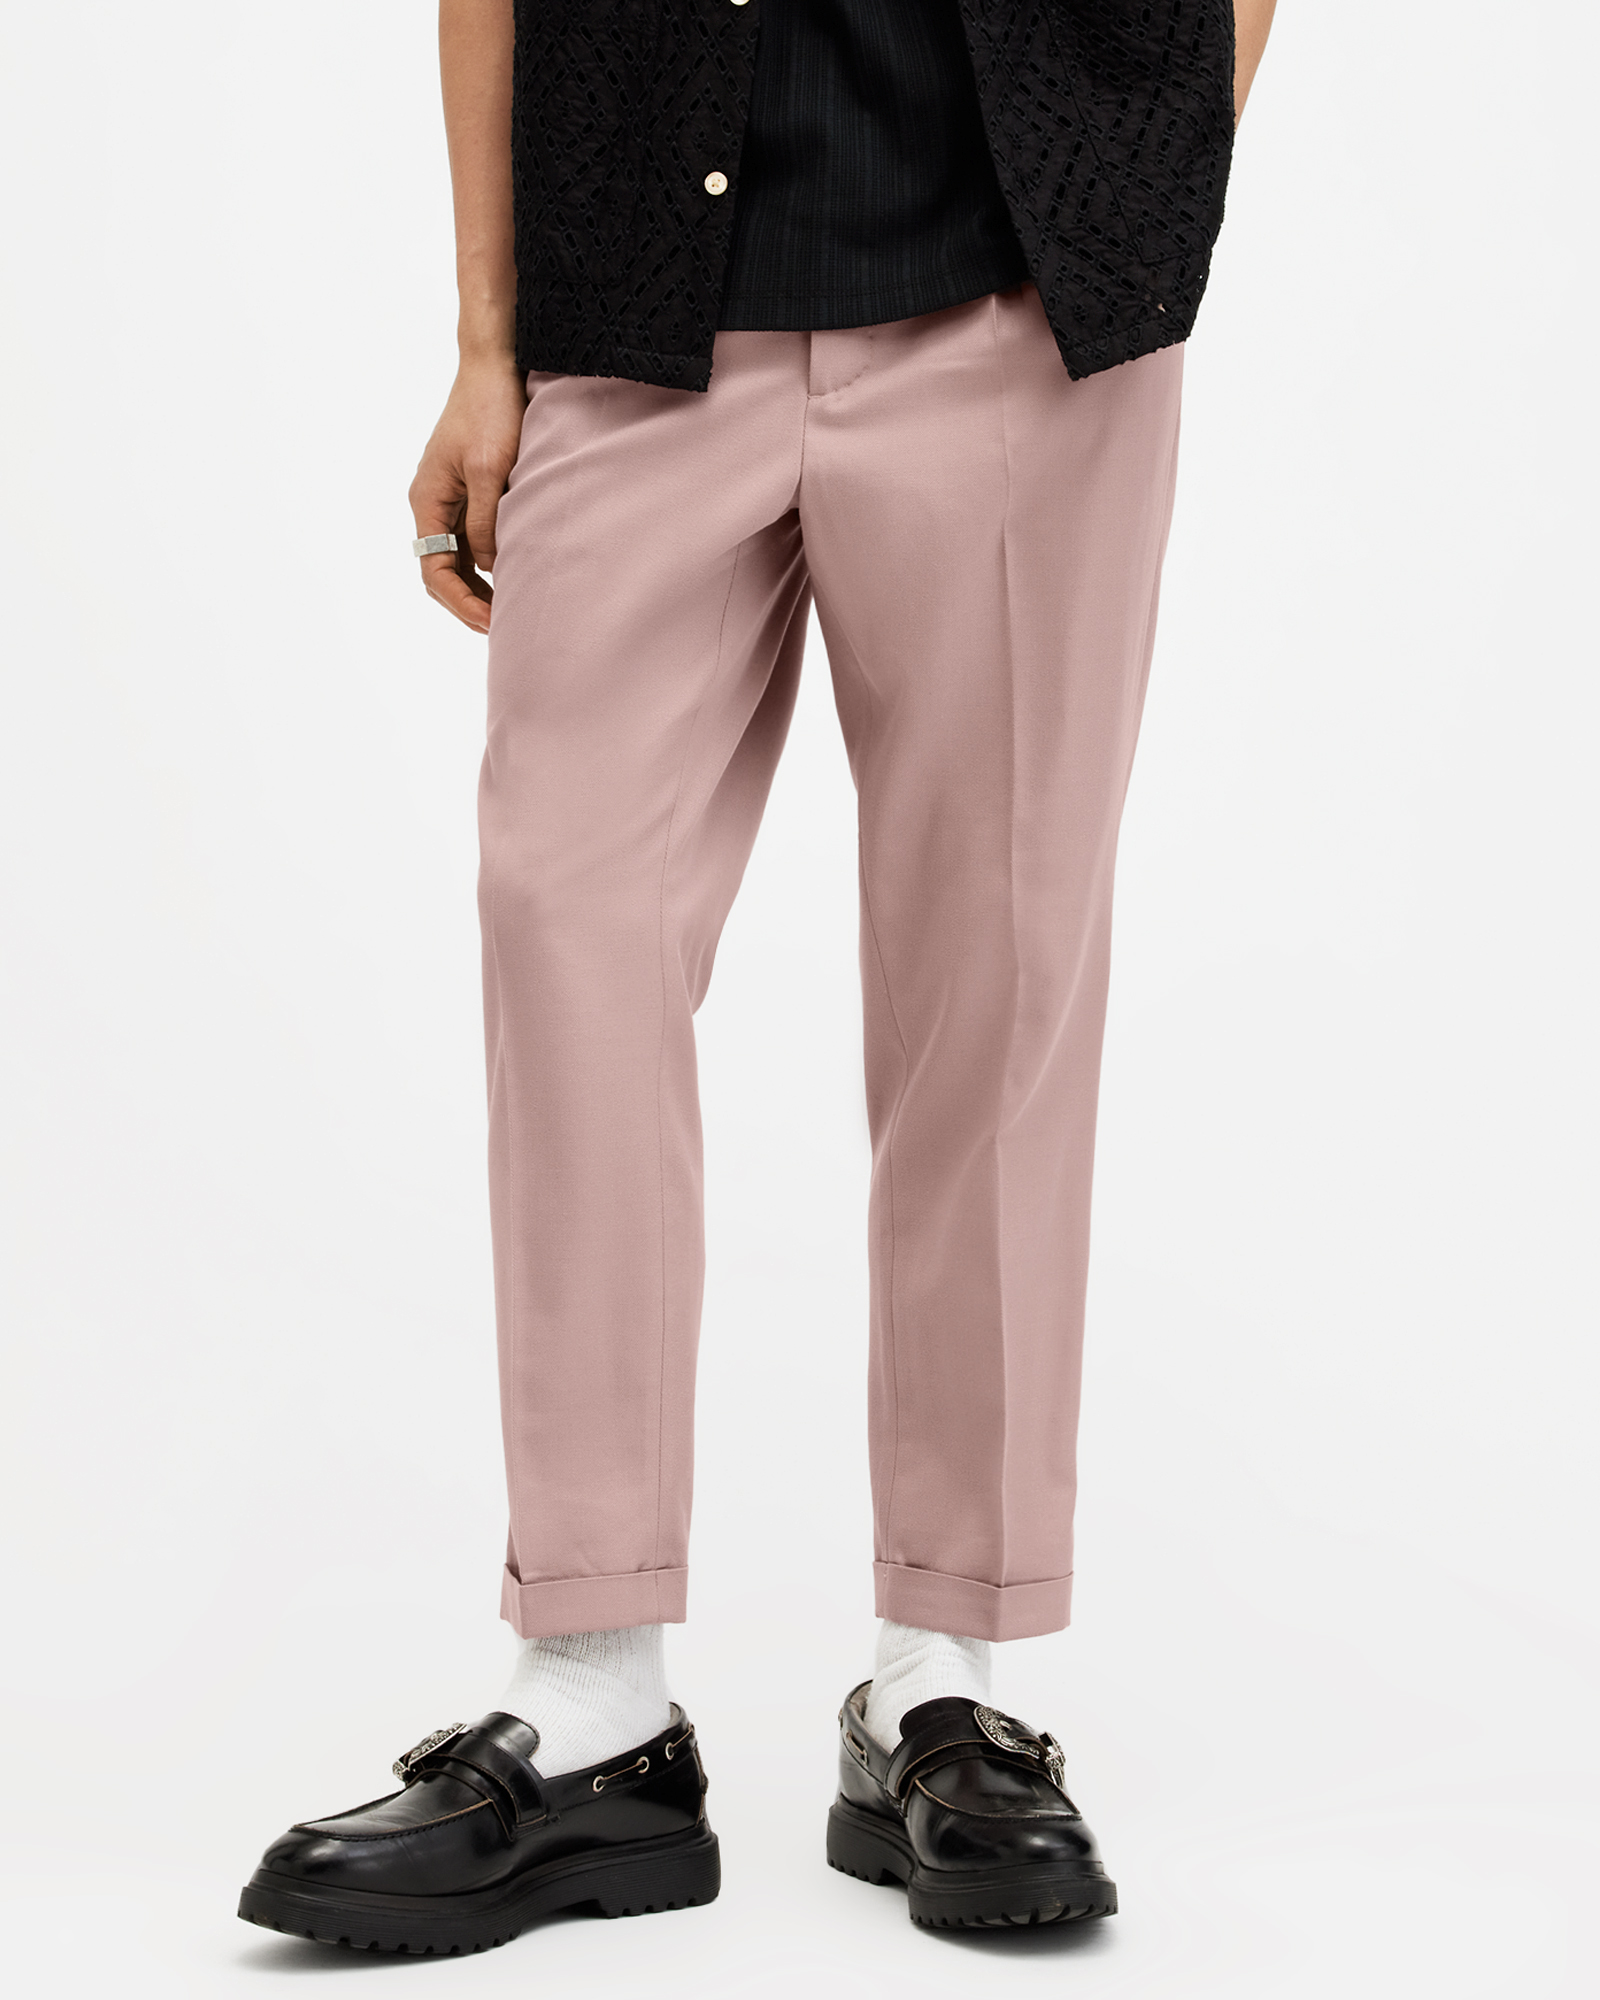 AllSaints Tallis Slim Fit Cropped Tapered Trousers,, Dusty Pink